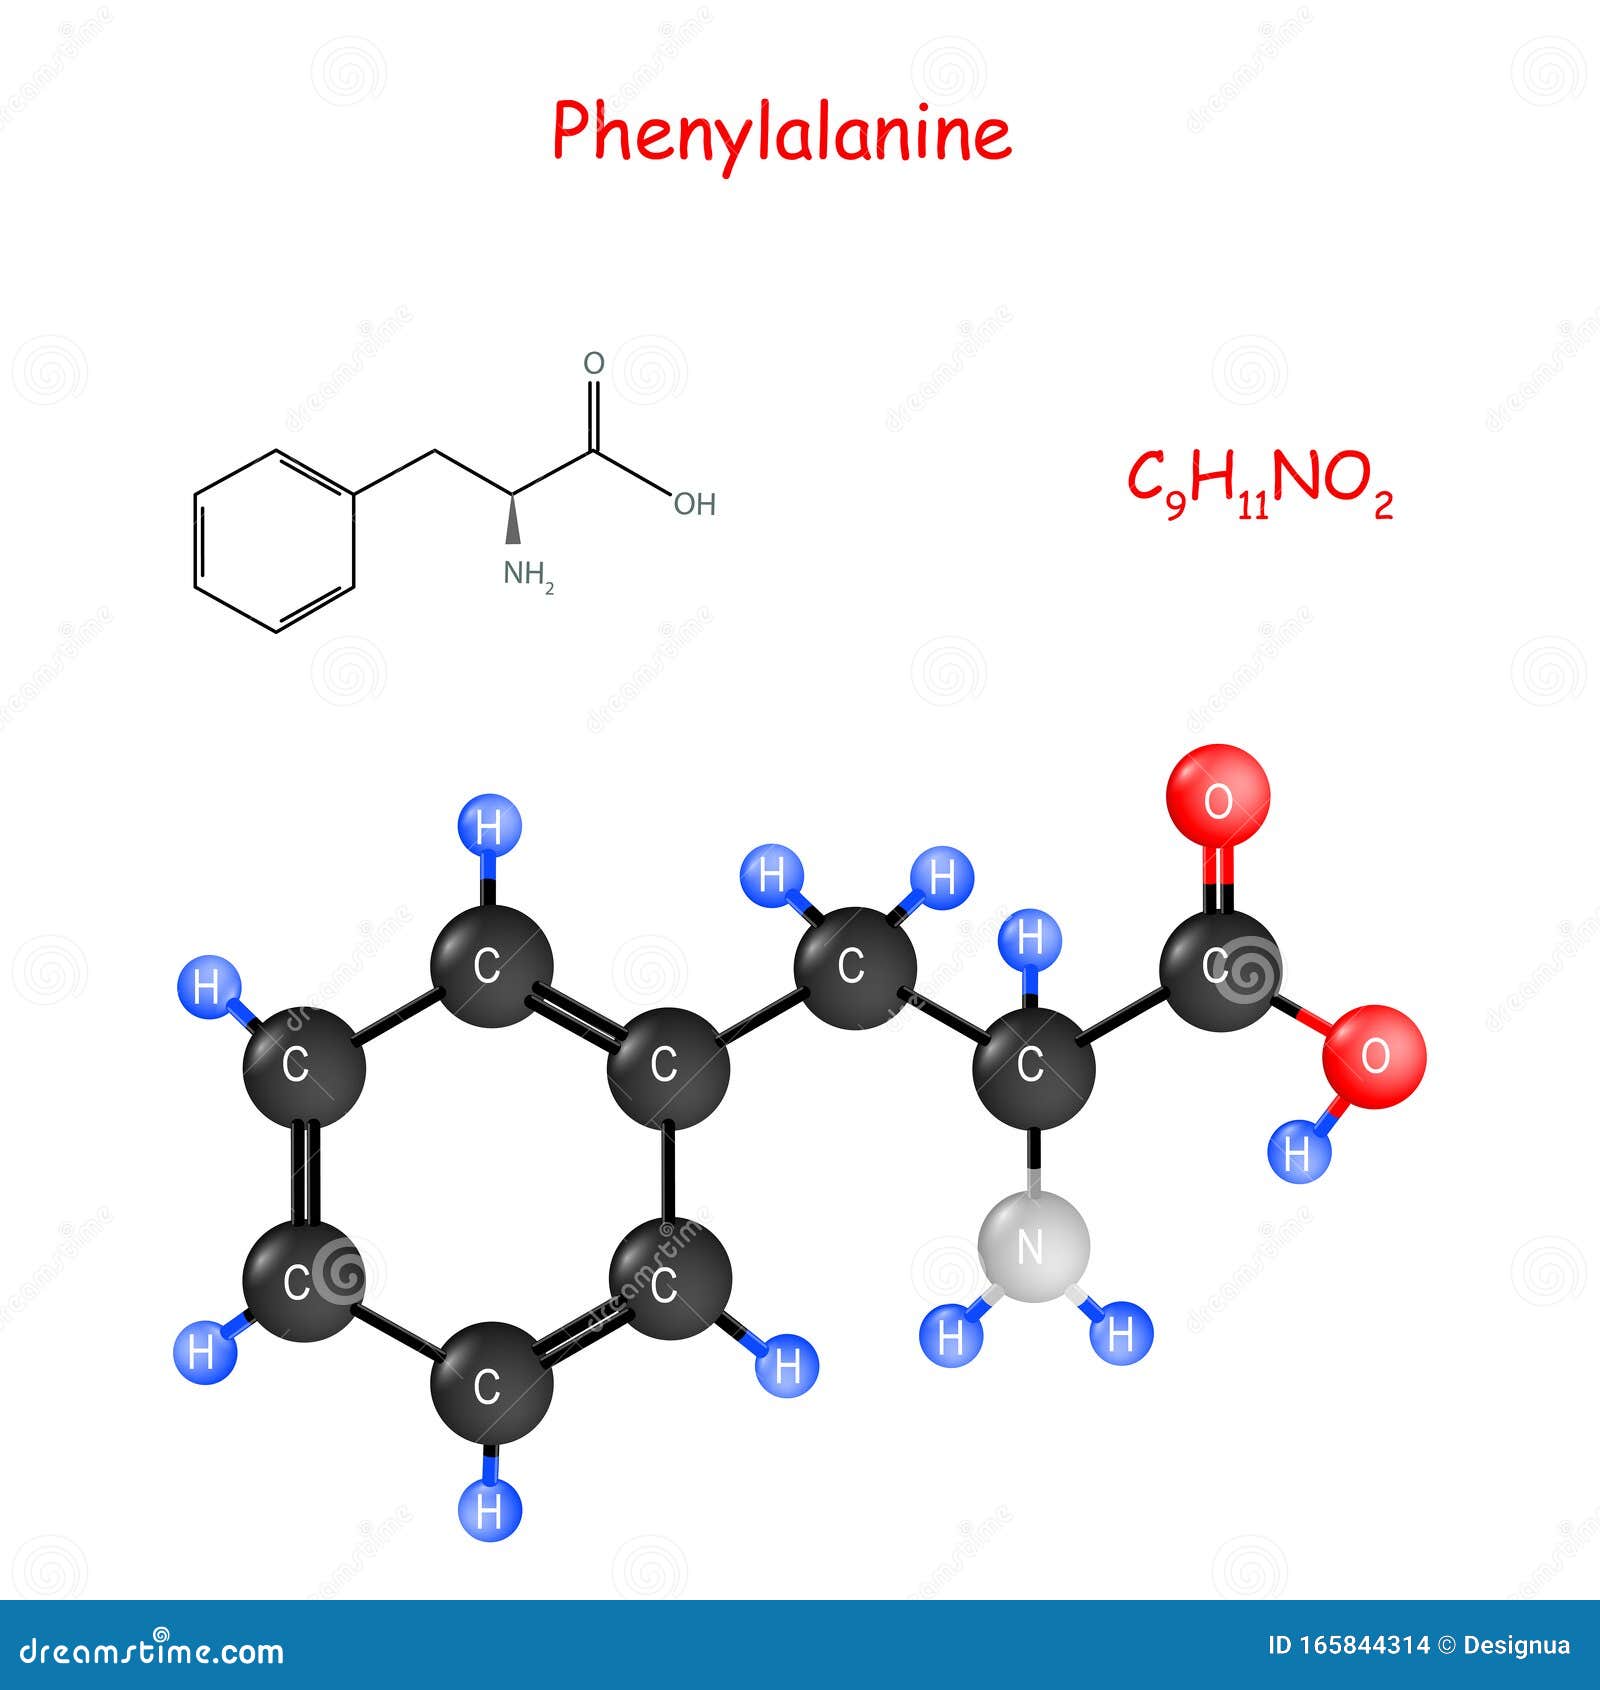 Phenylalanine. Chemical Structural Formula And Model Of Molecule Stock ...
